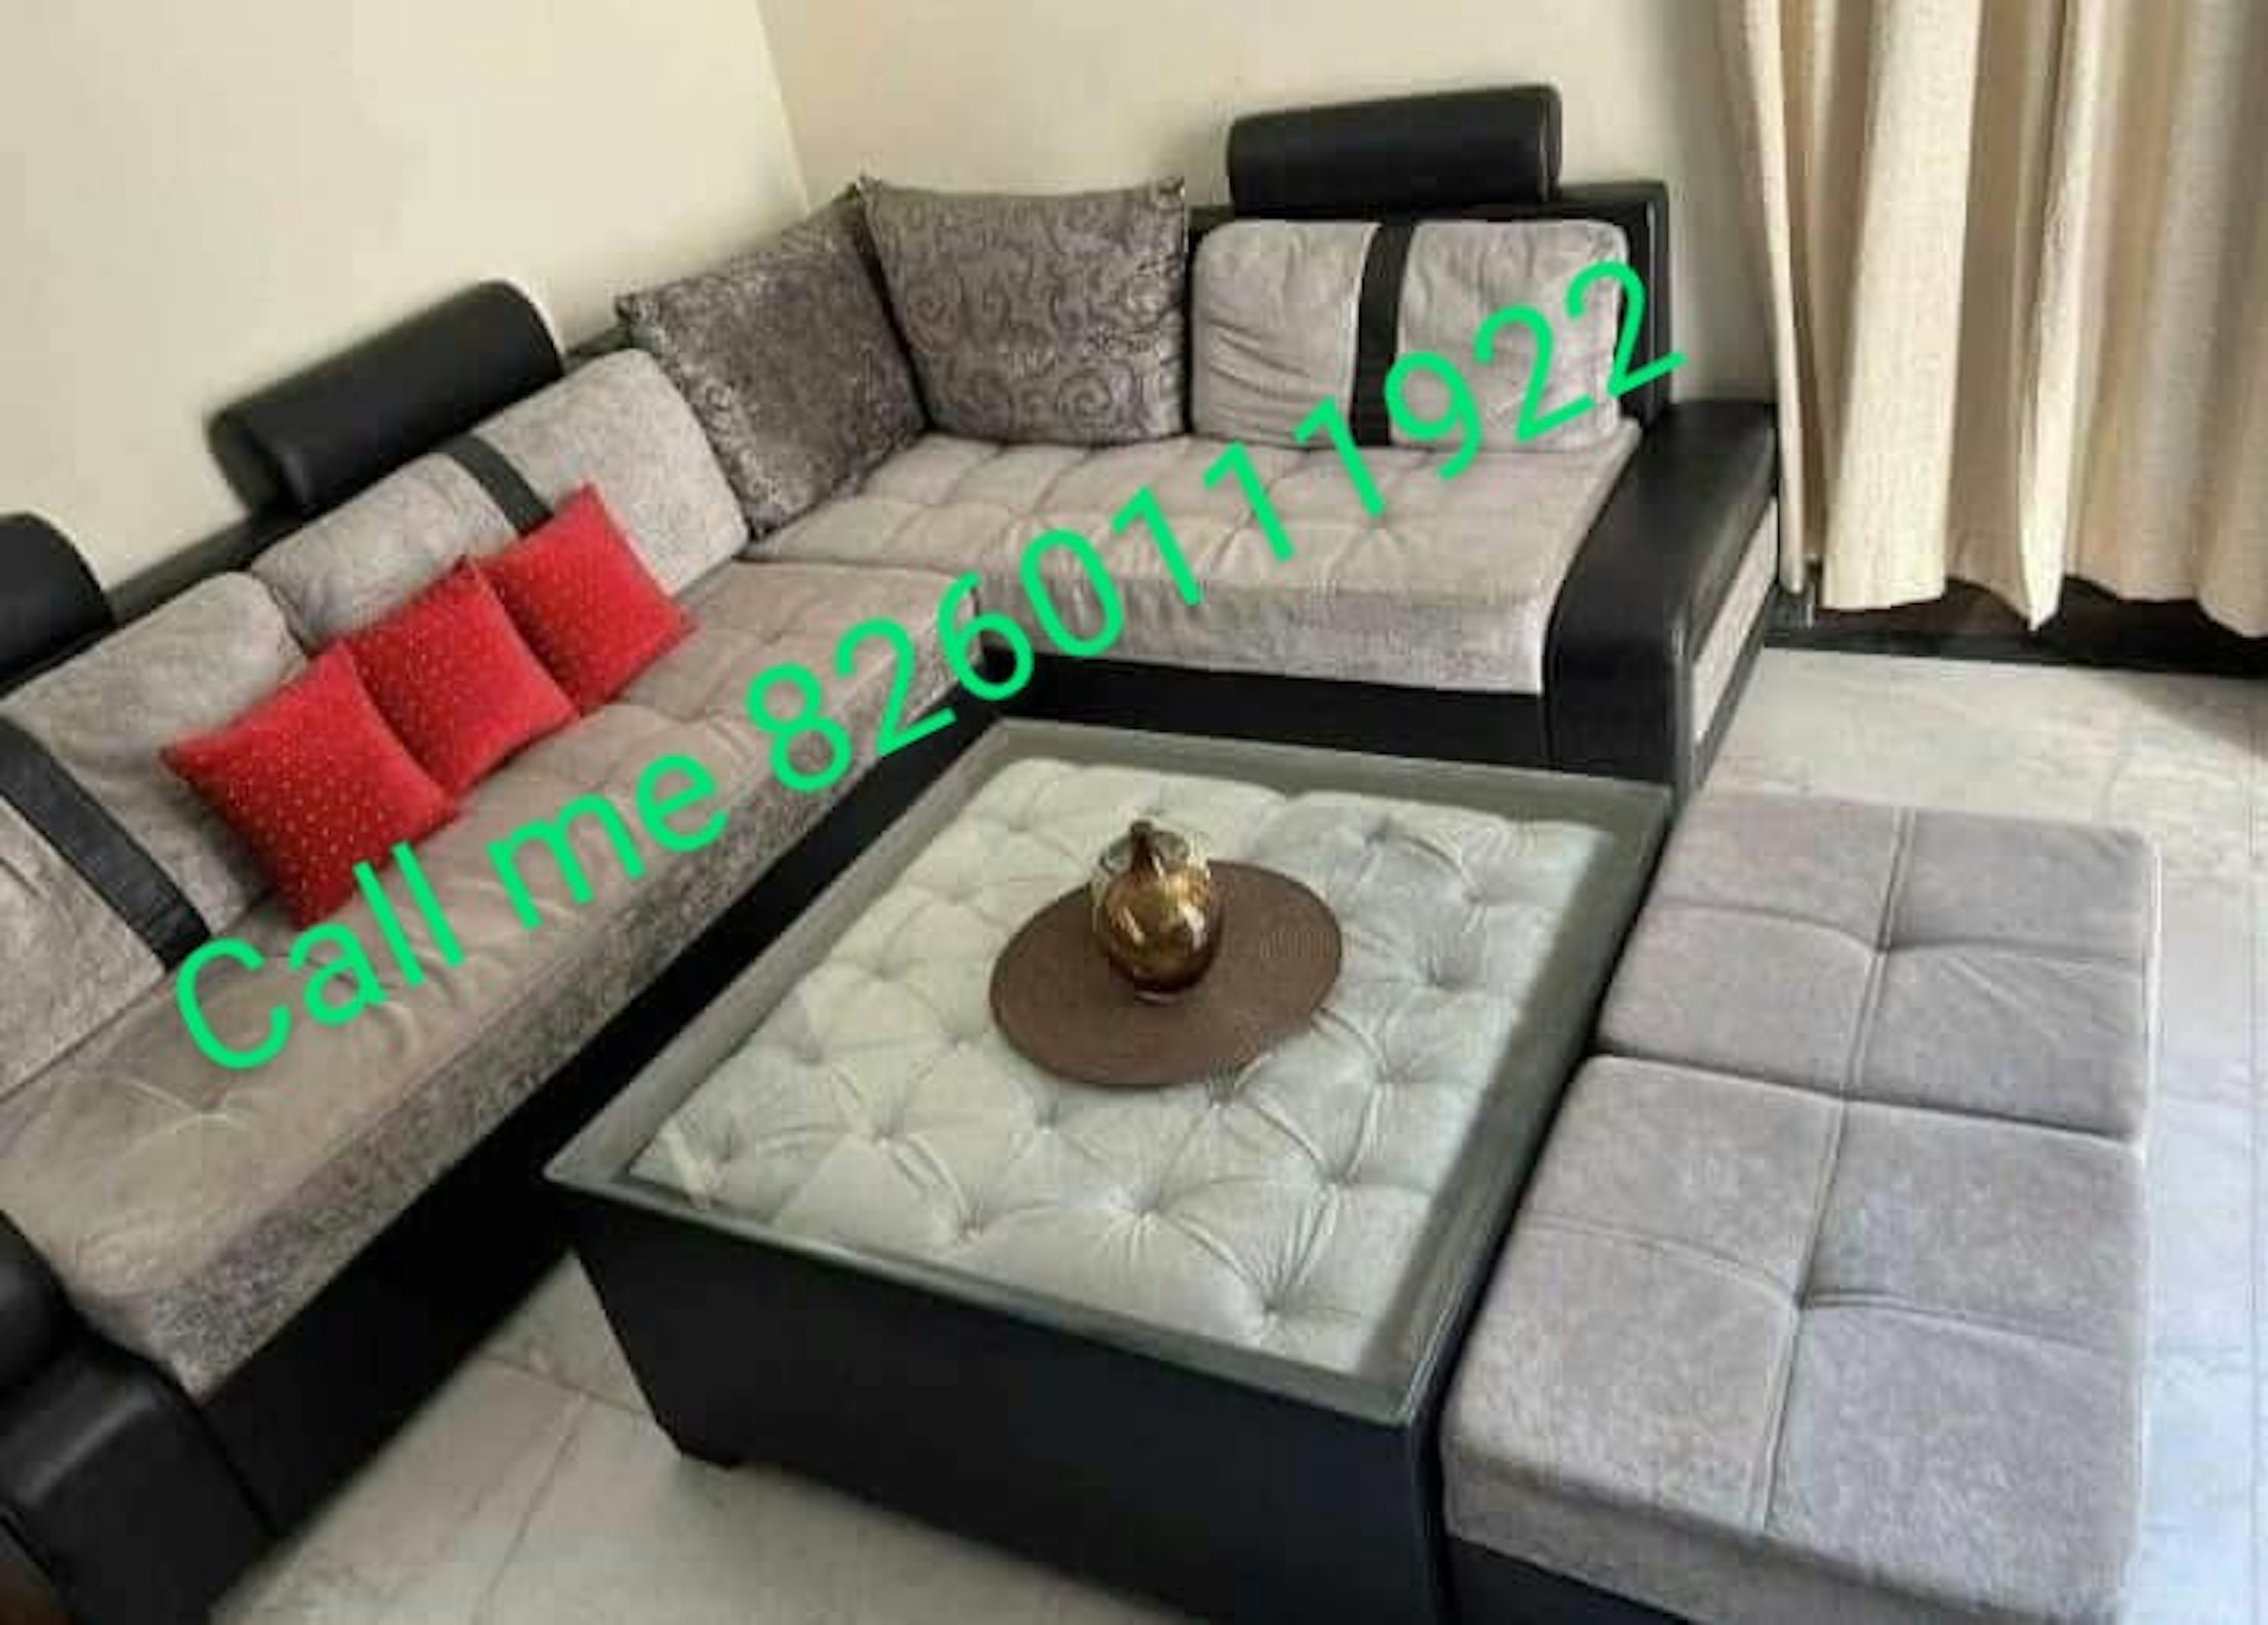 View - Sofa set photos, Sofa set available in Solapur, make deal in 10000